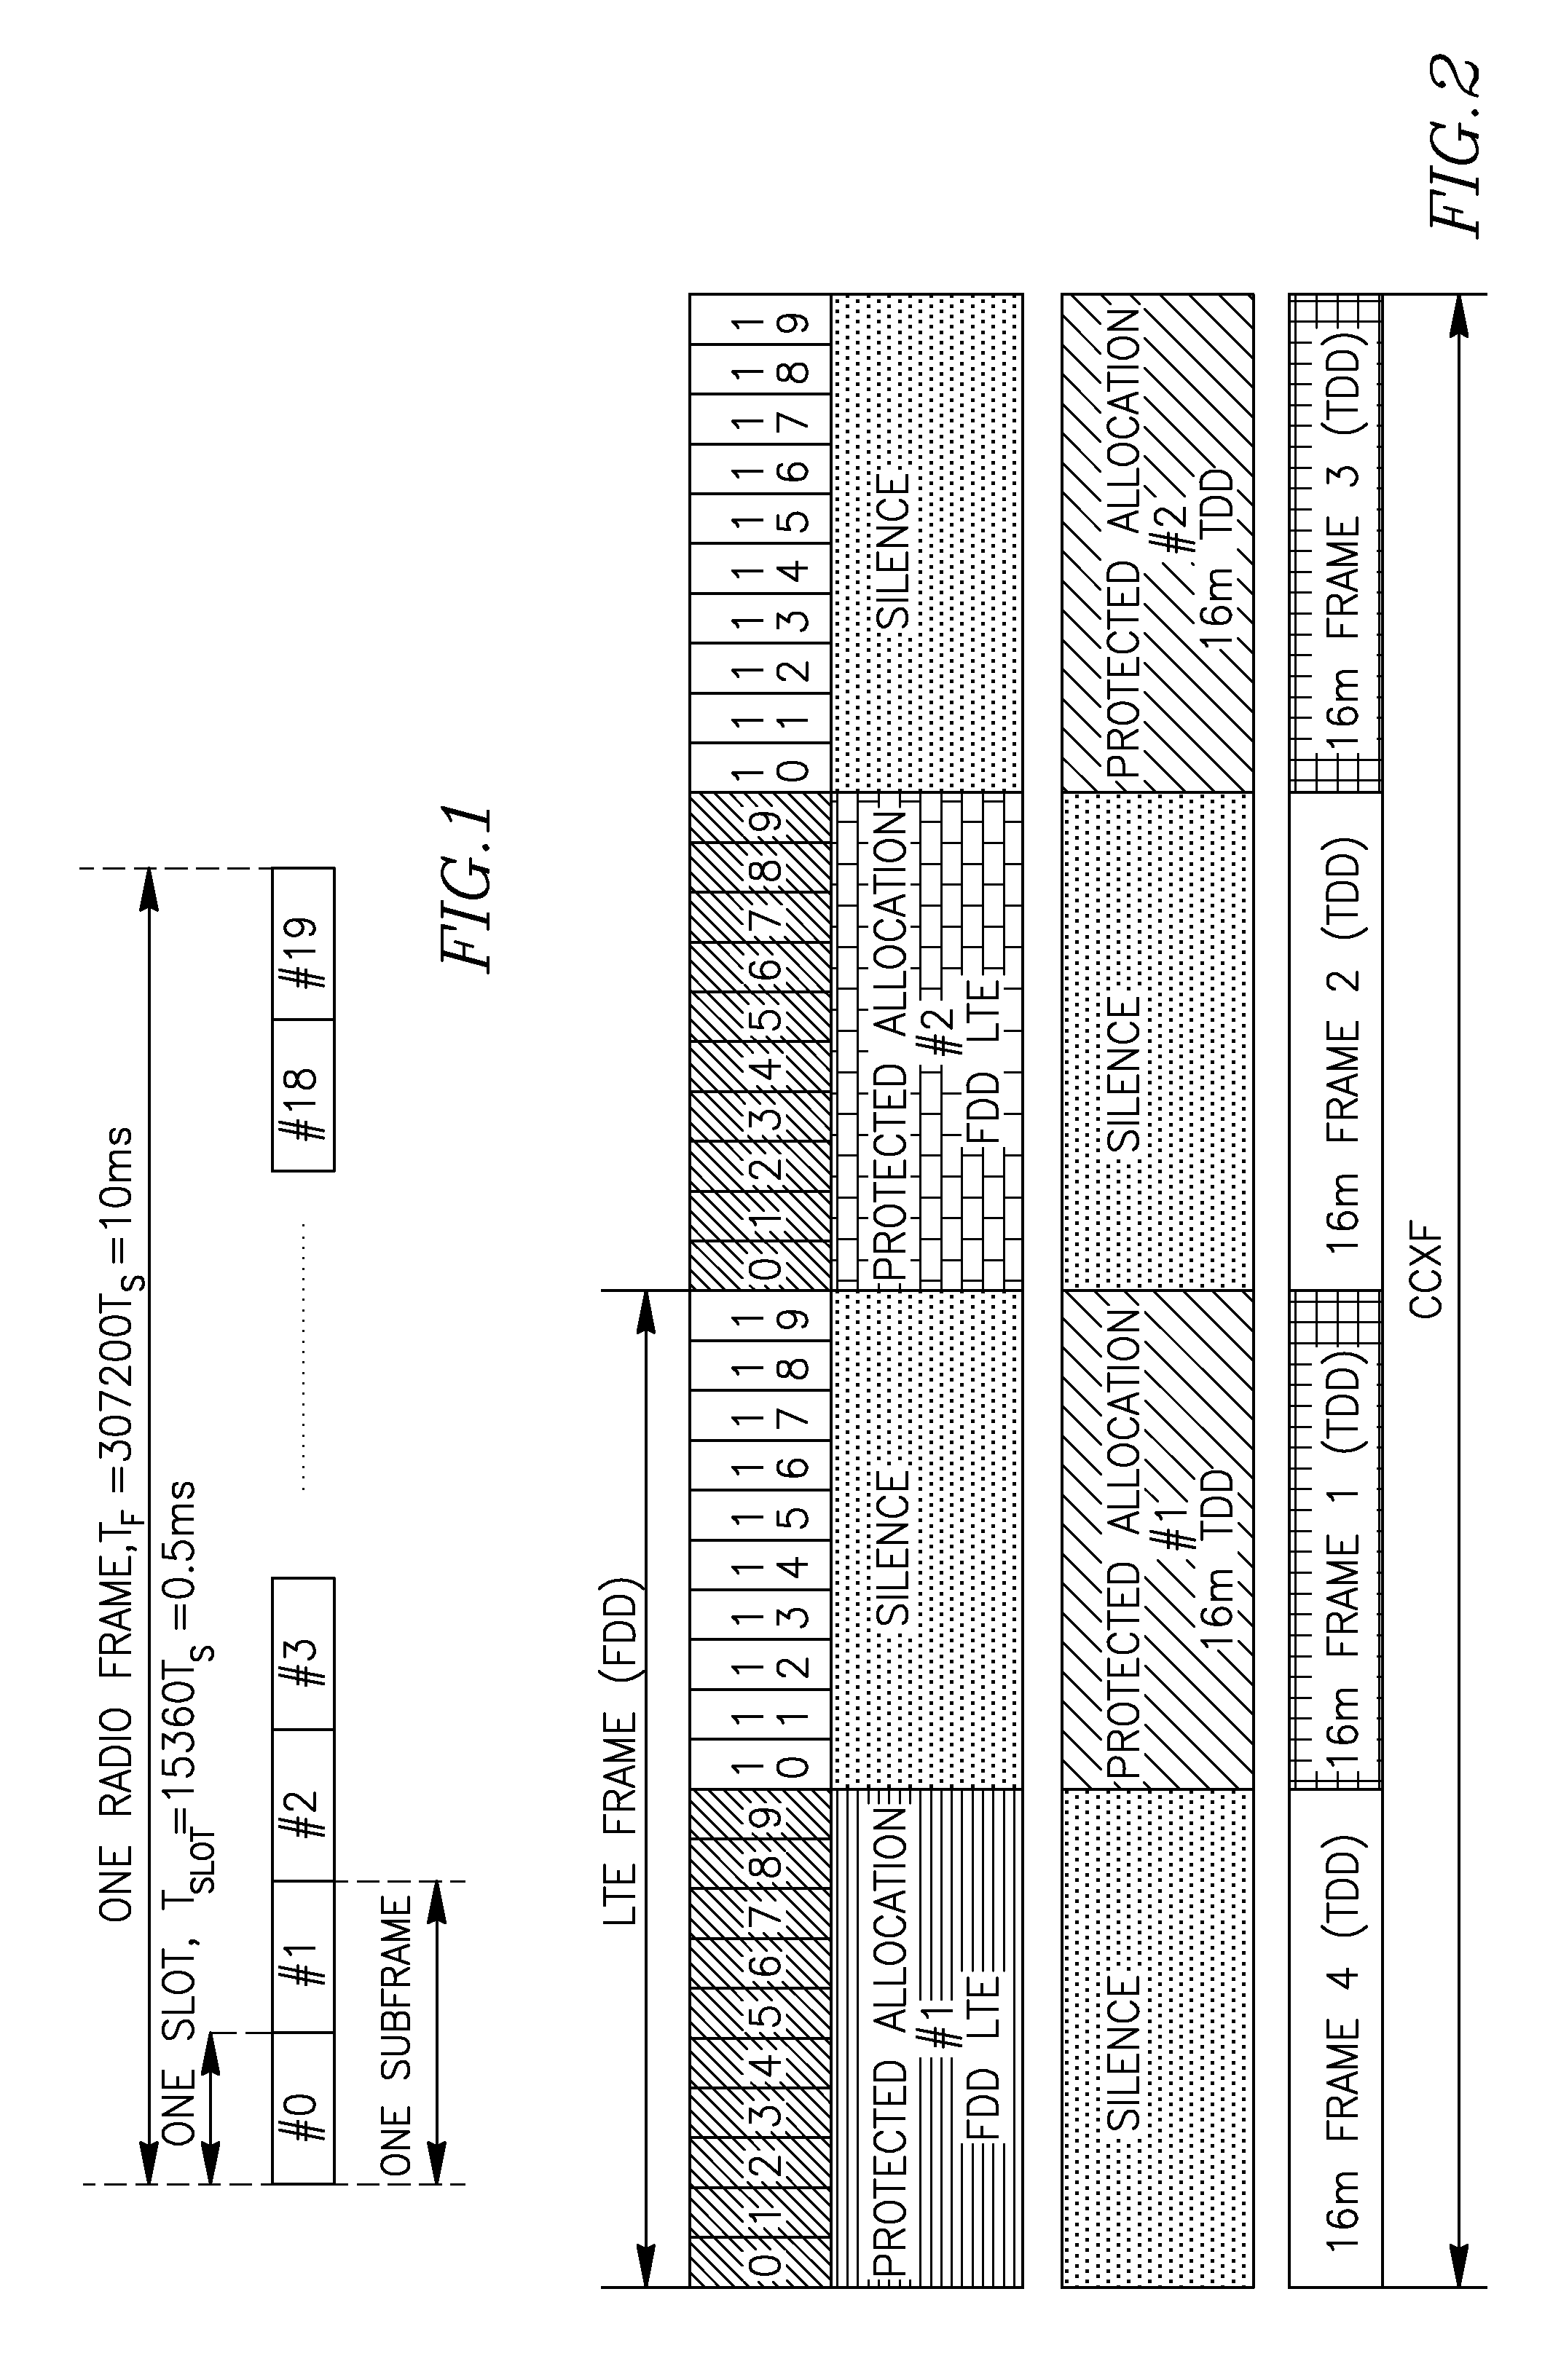 Method for improving coexistence between adjacent TDD and fdd wireless networks